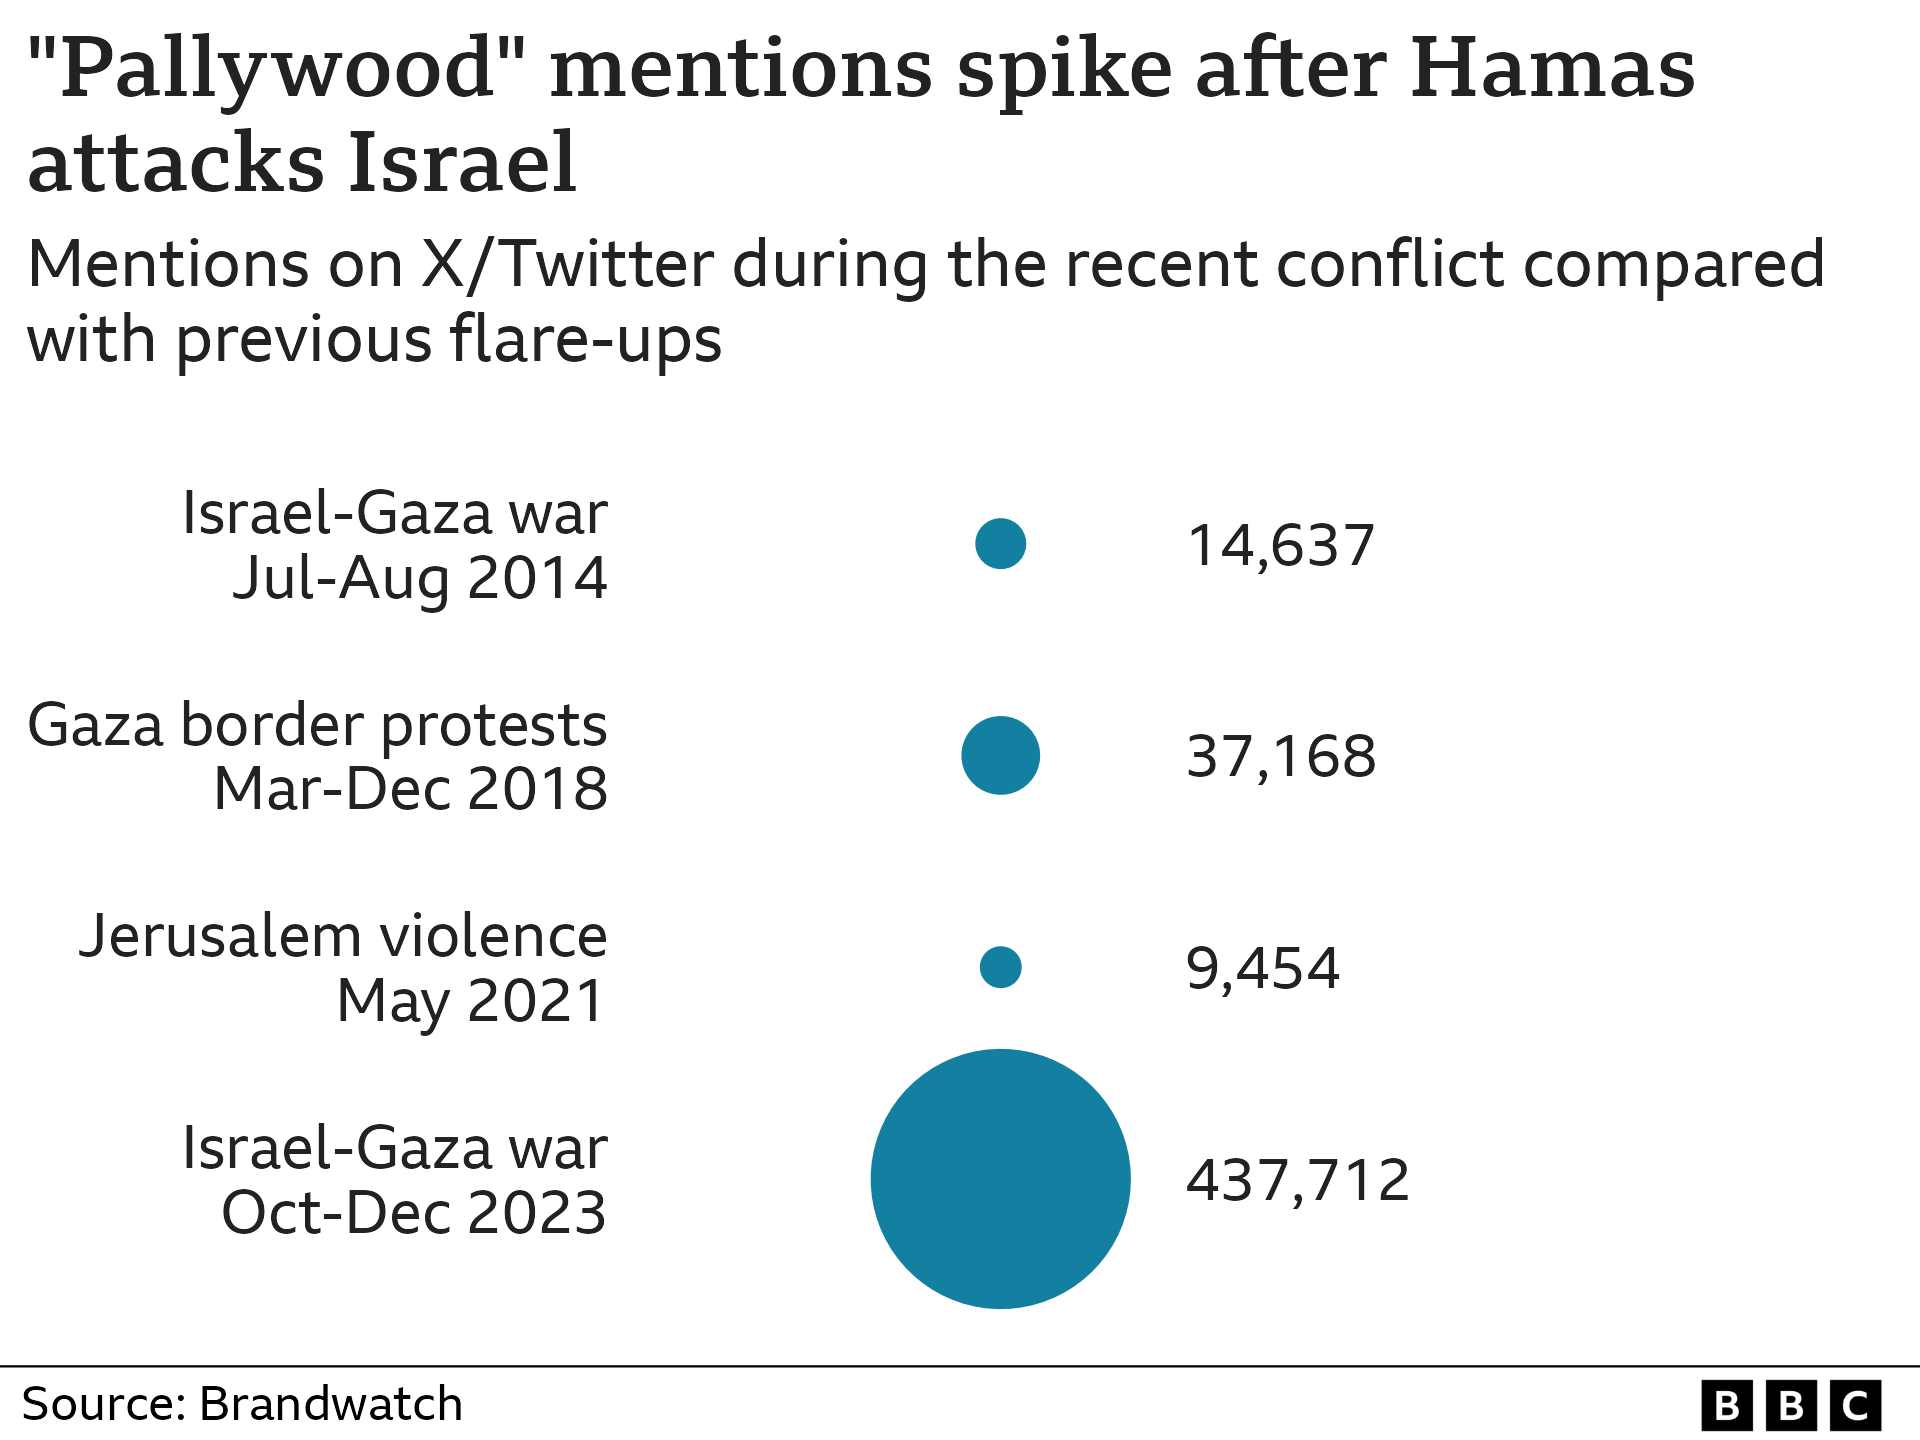 Dot chart showing how mentions of Pallywood on Twitter grew from 14,637 in the earlier Israel-Gaza war in 2014 to 437,712 in the current conflict